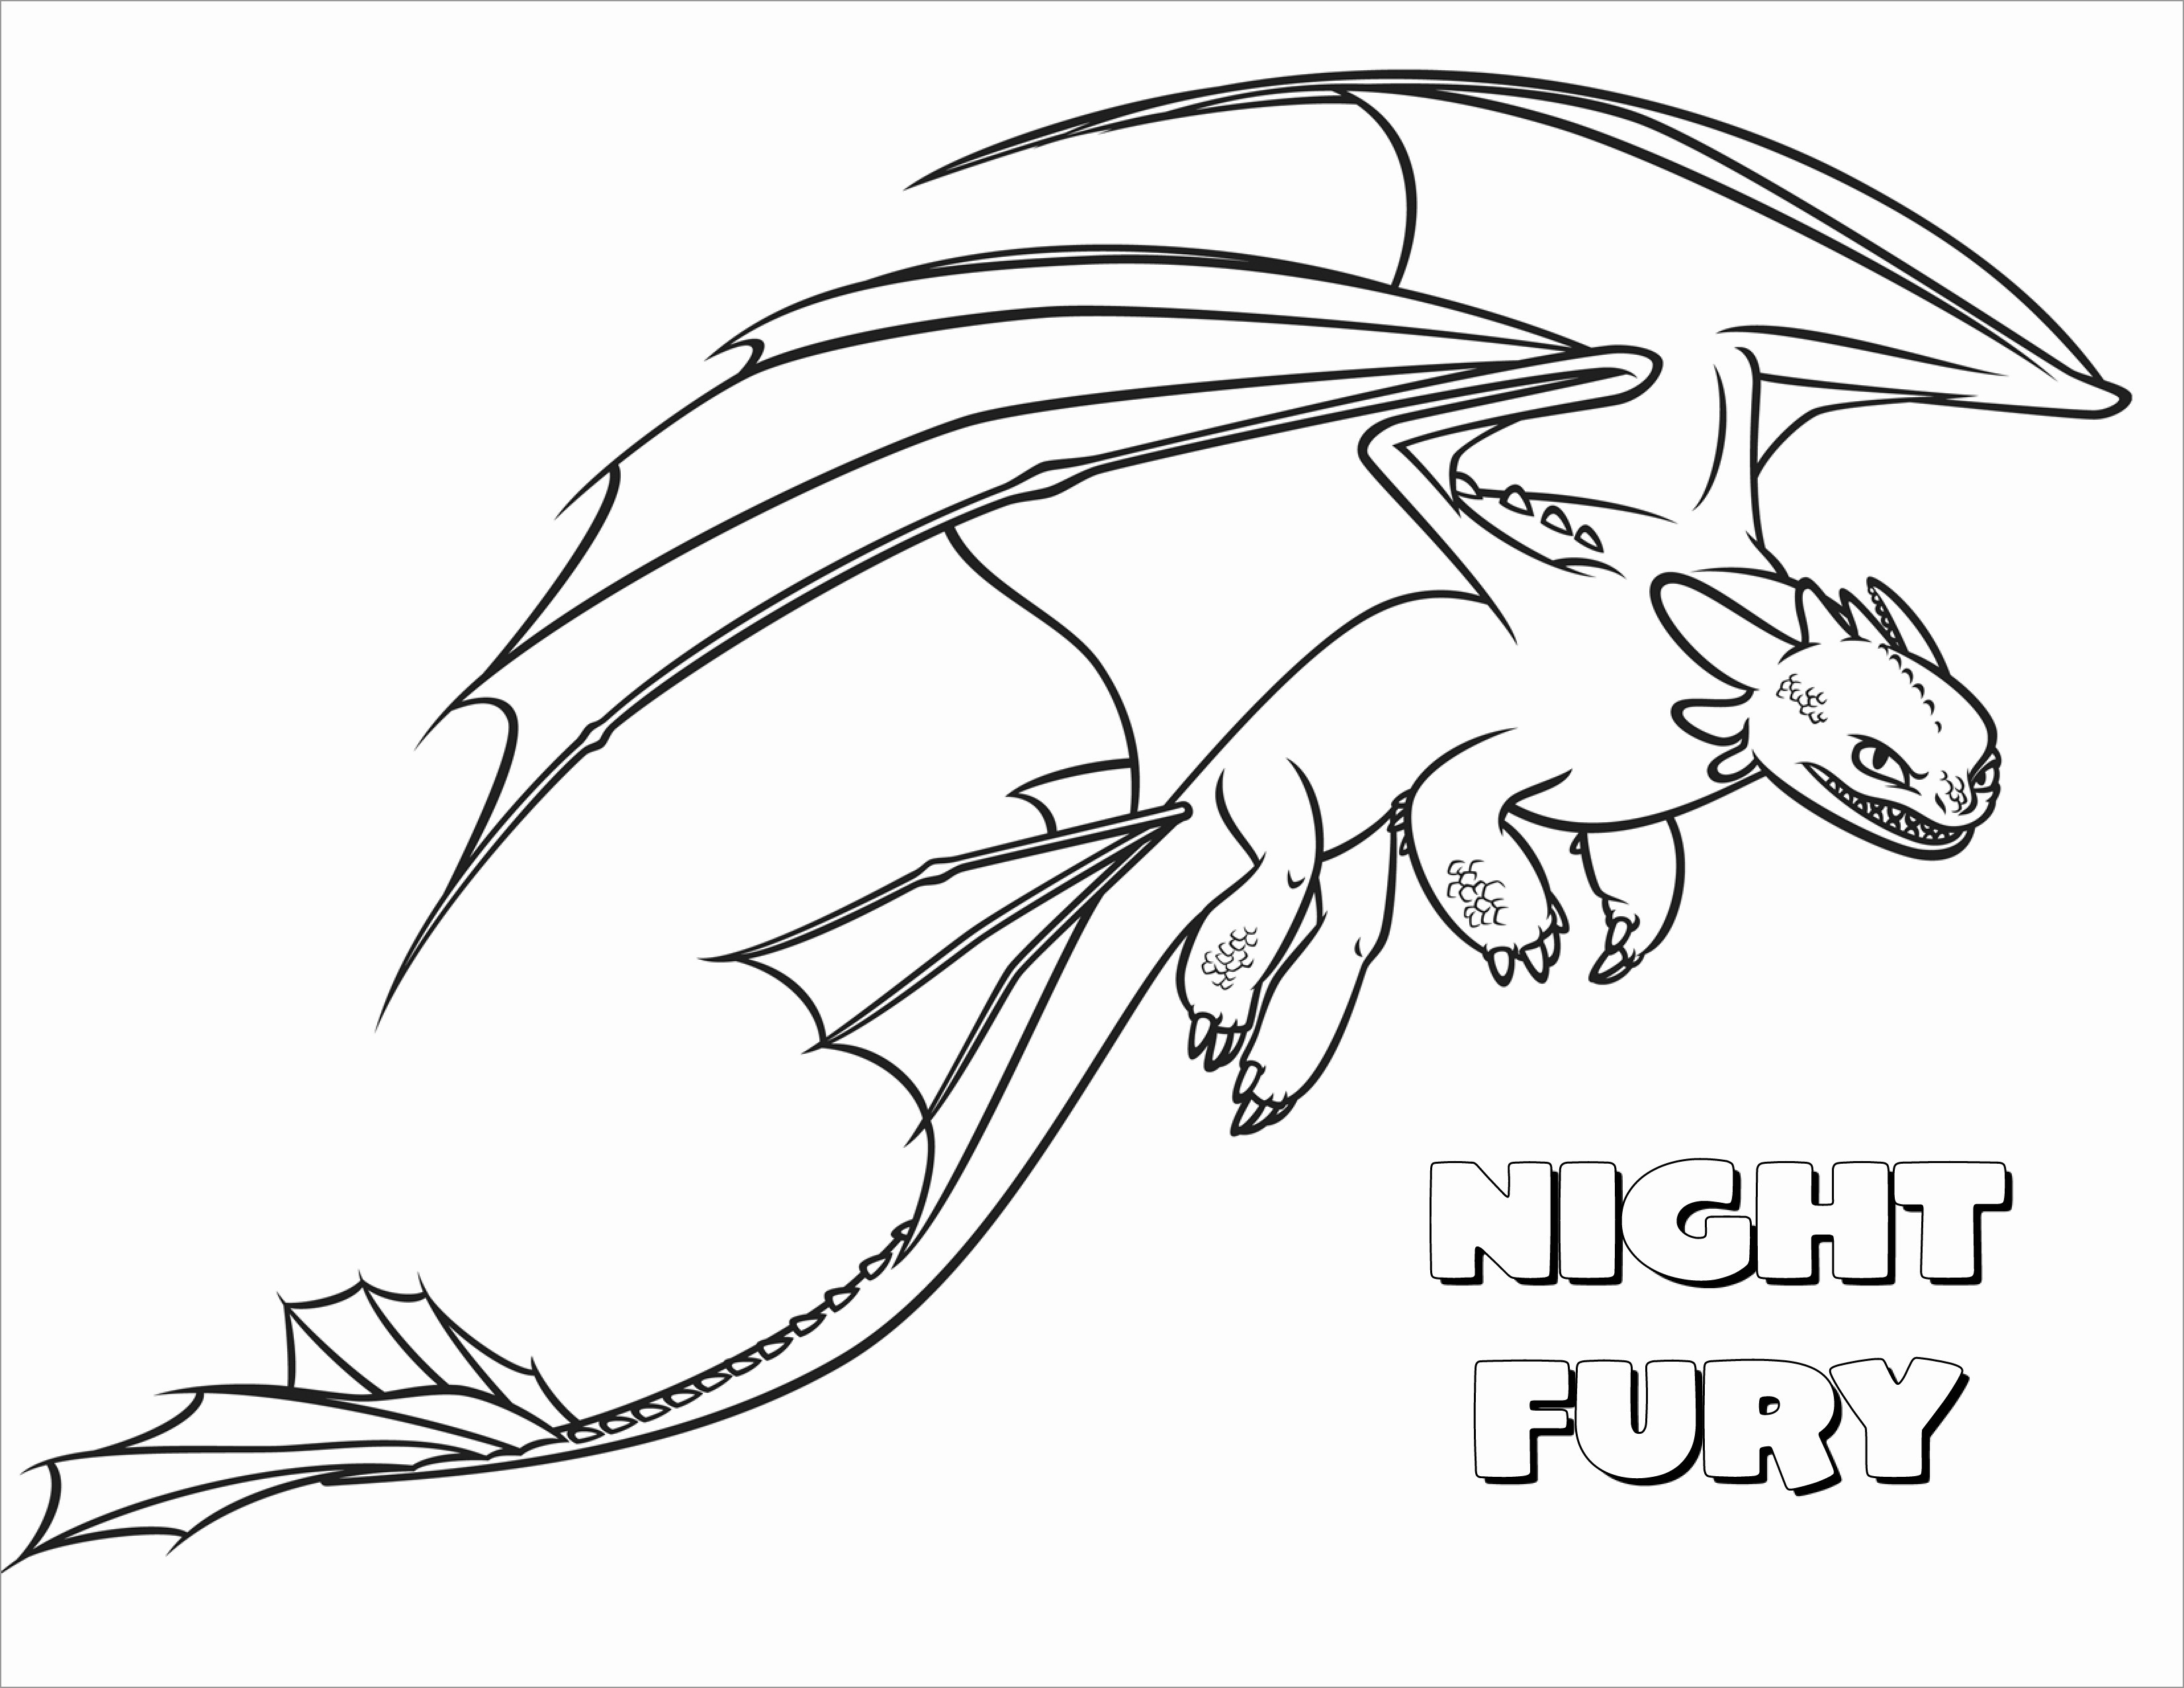 How to Train Your Dragon Night Fury Coloring Page